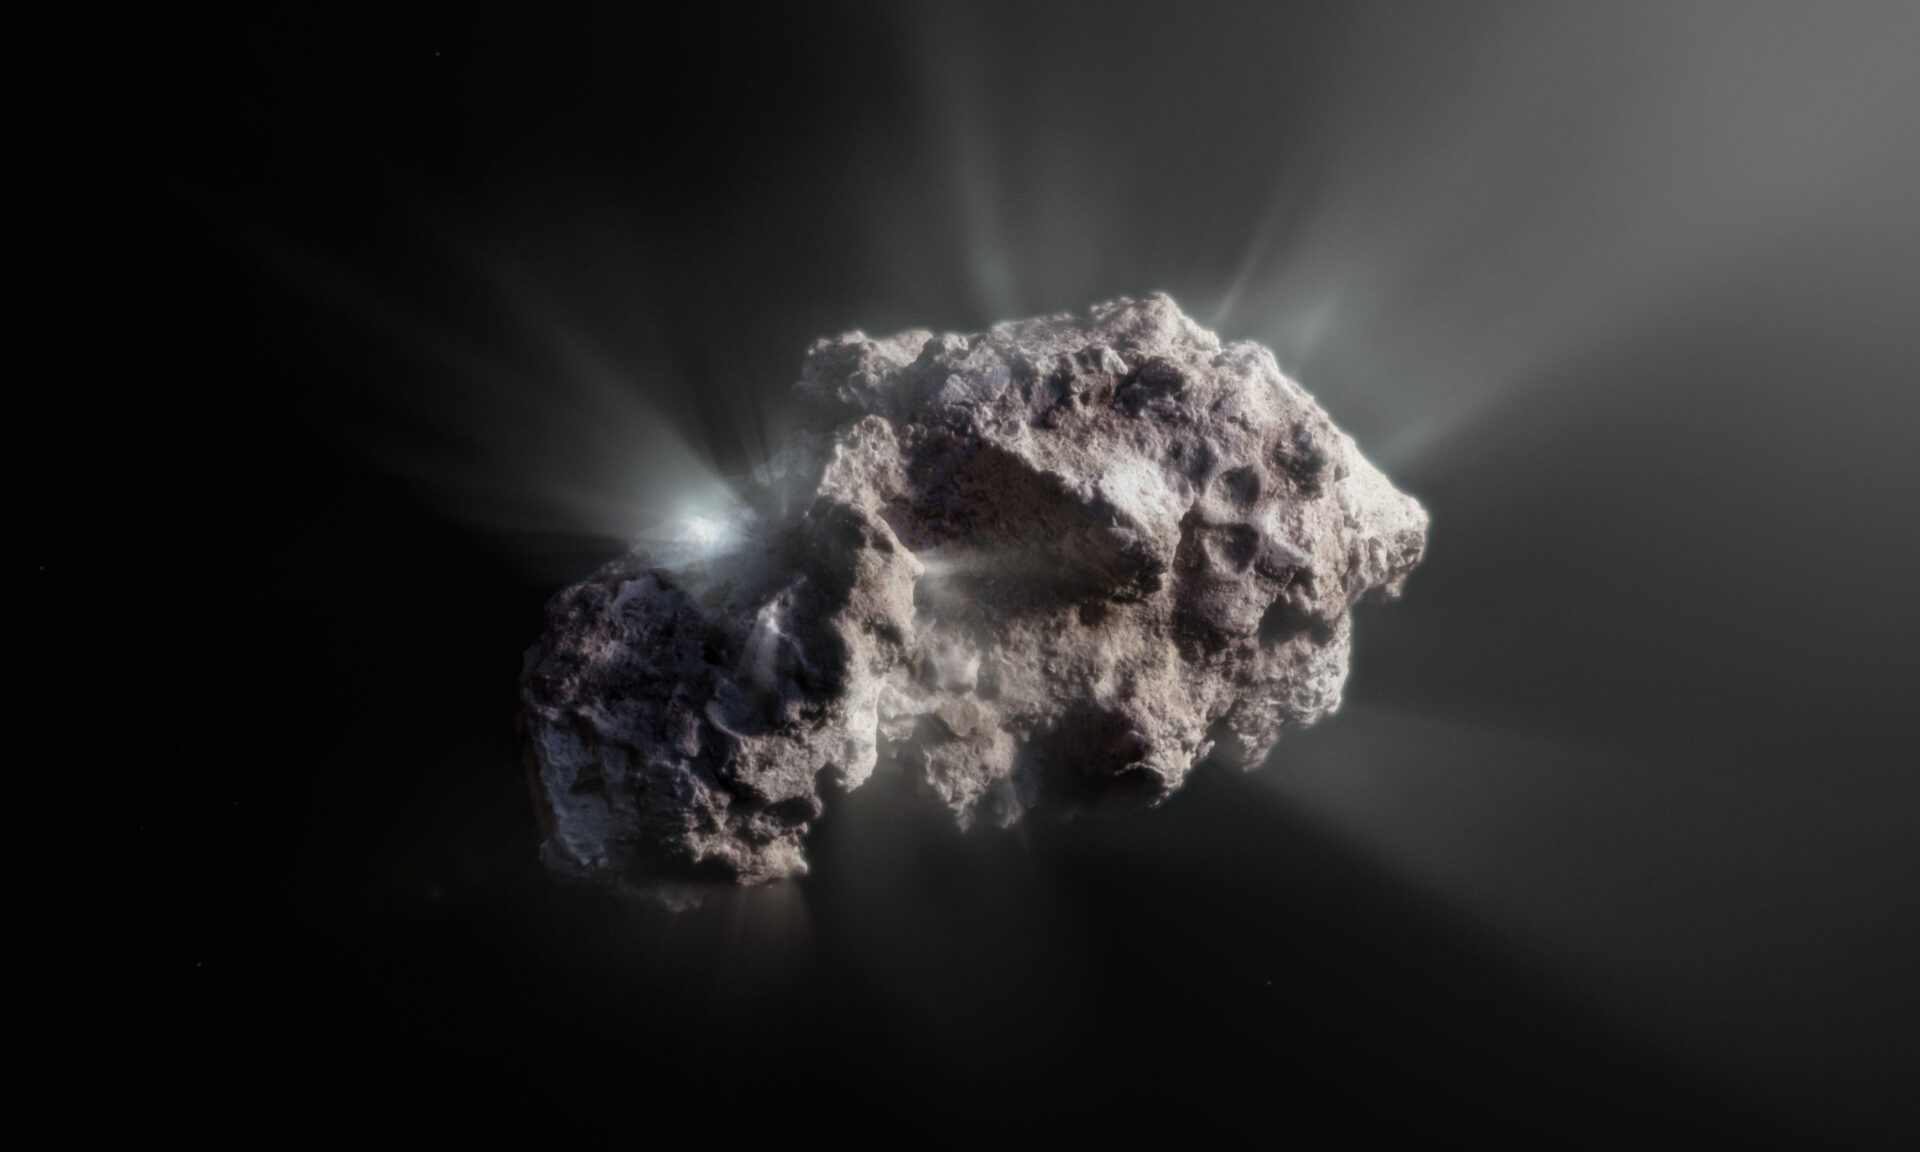 <p>This image shows an artist’s impression of what the surface of the 2I/Borisov comet might look like.   2I/Borisov was a visitor from another planetary system that passed by our Sun in 2019, allowing astronomers a unique view of an interstellar comet. While telescopes on Earth and in space captured images of this comet, we don’t have any close-up observations of 2I/Borisov. It is therefore up to artists to create their own ideas of what the comet’s surface might look like, based on the scientific information we have about it. Credit: ESO/M. Kormesser</p>
